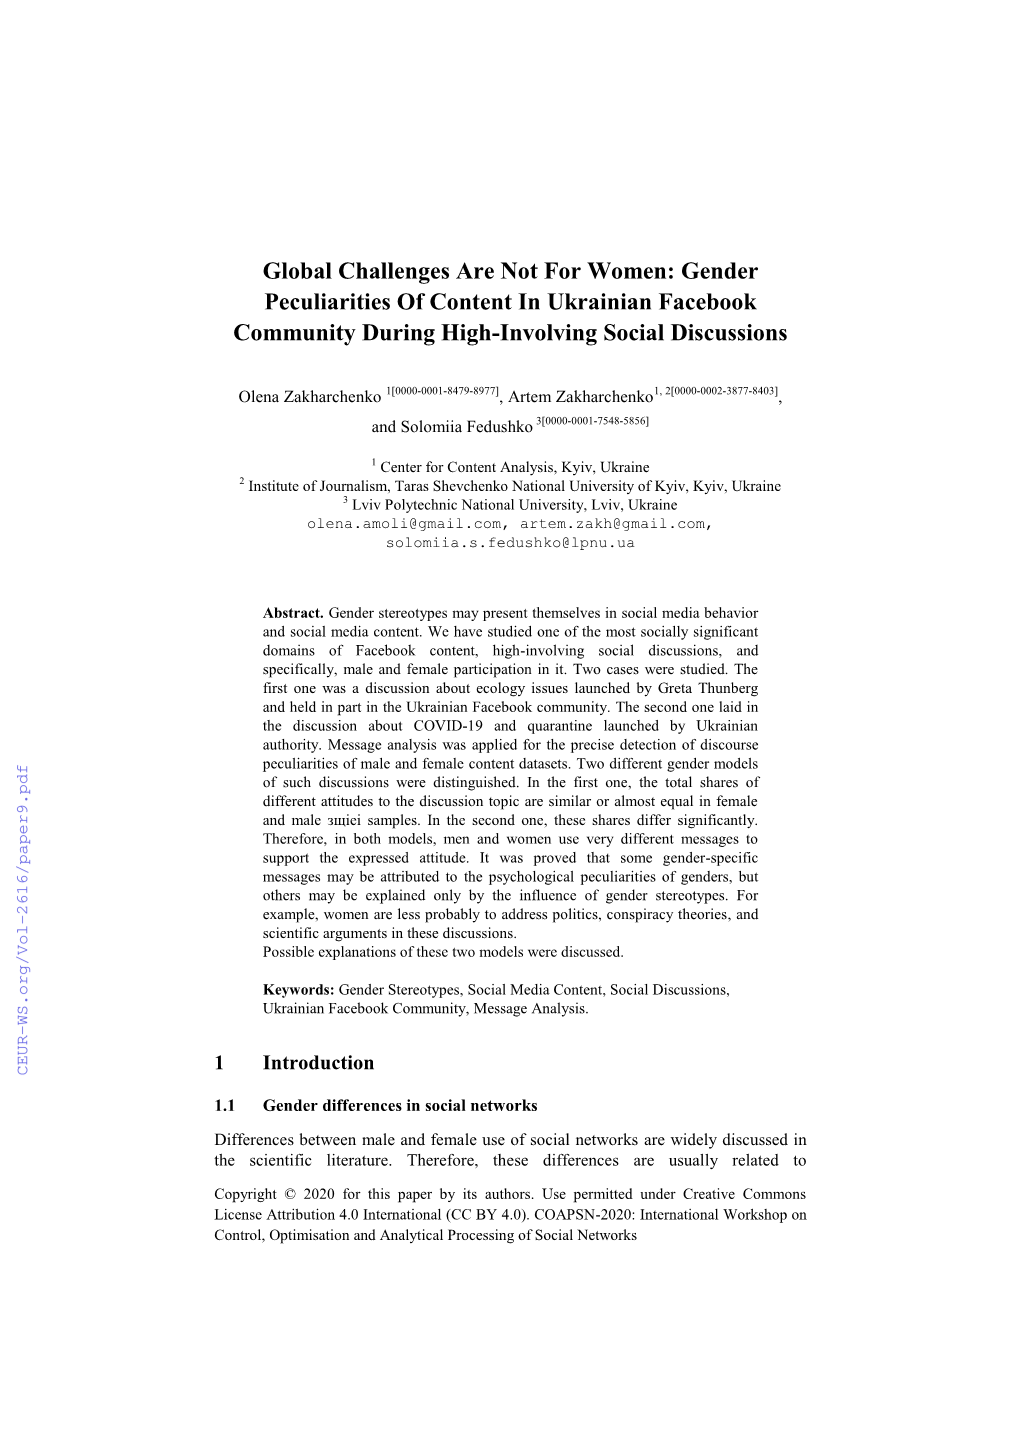 Global Challenges Are Not for Women: Gender Peculiarities of Content in Ukrainian Facebook Community During High-Involving Social Discussions